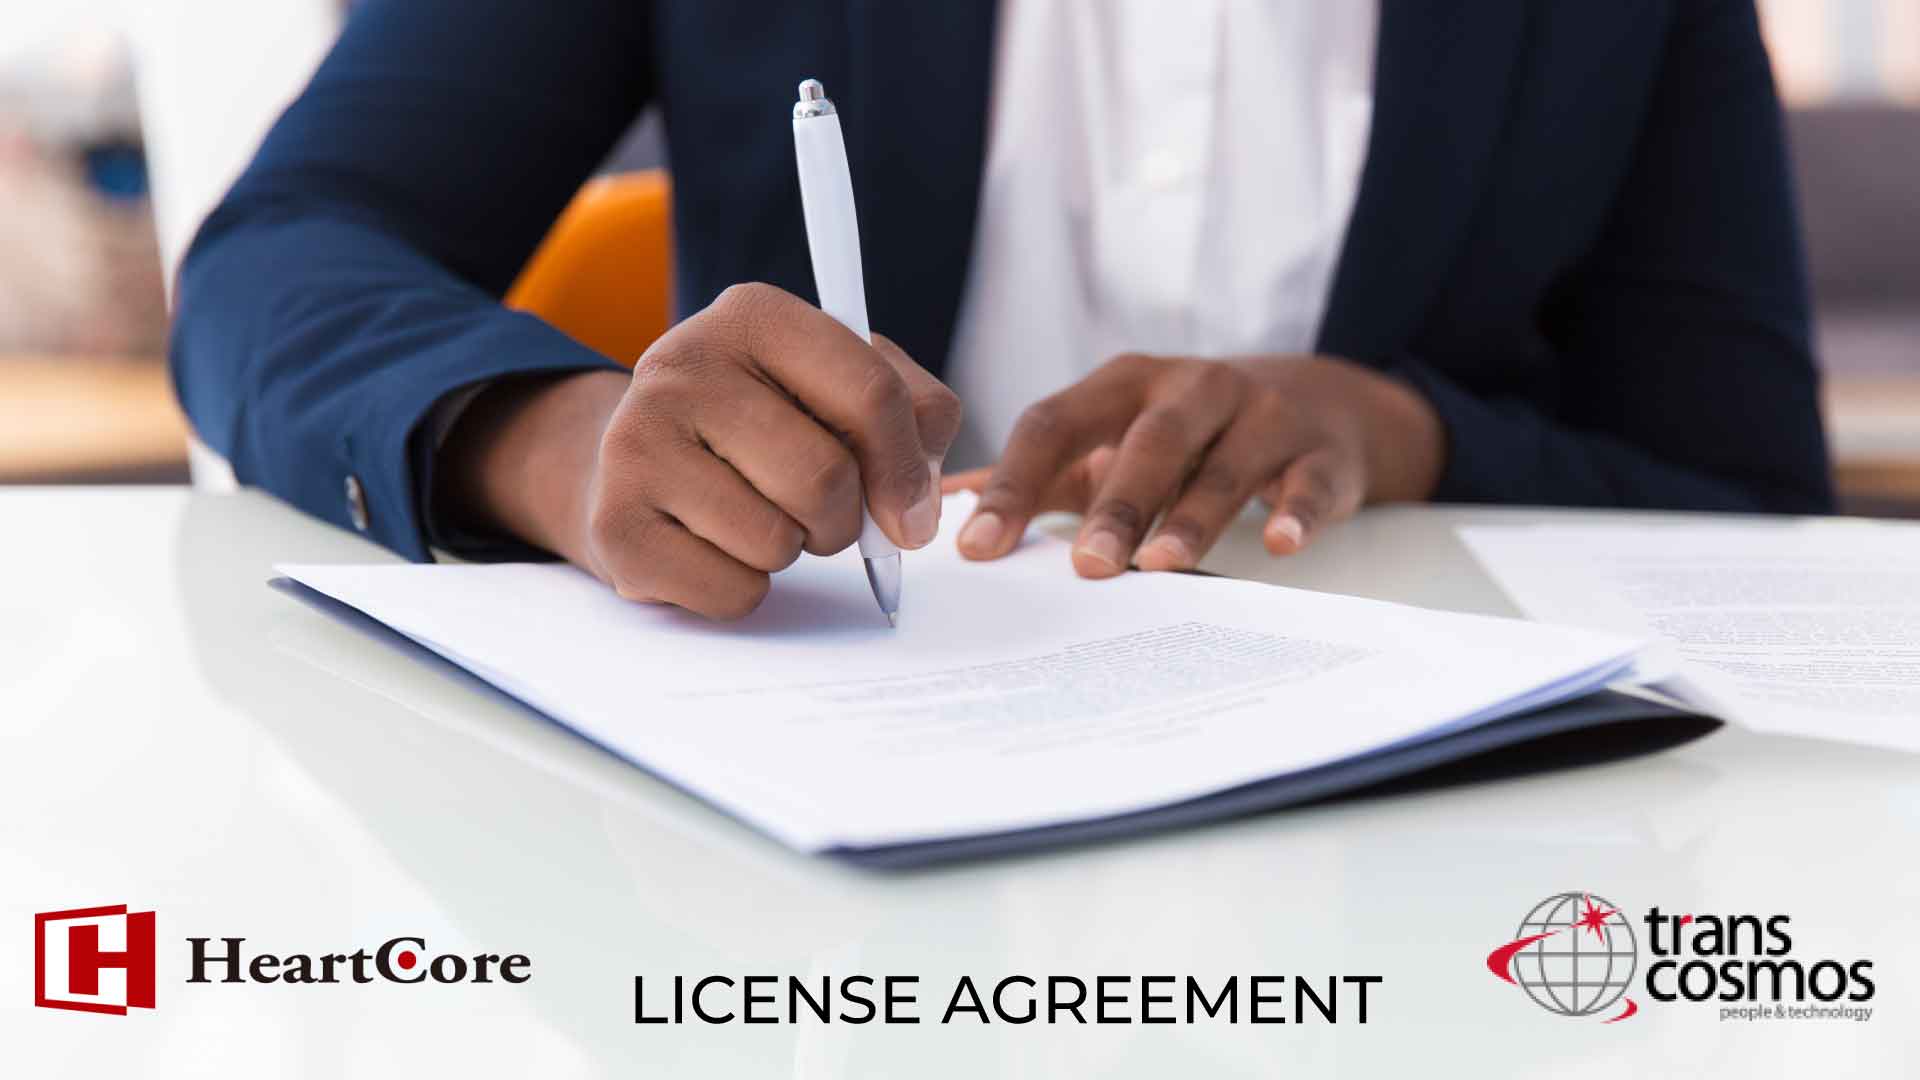 HeartCore Enters into License Agreement with Transcosmos Digital Technology for its Apromore Process Mining Tool